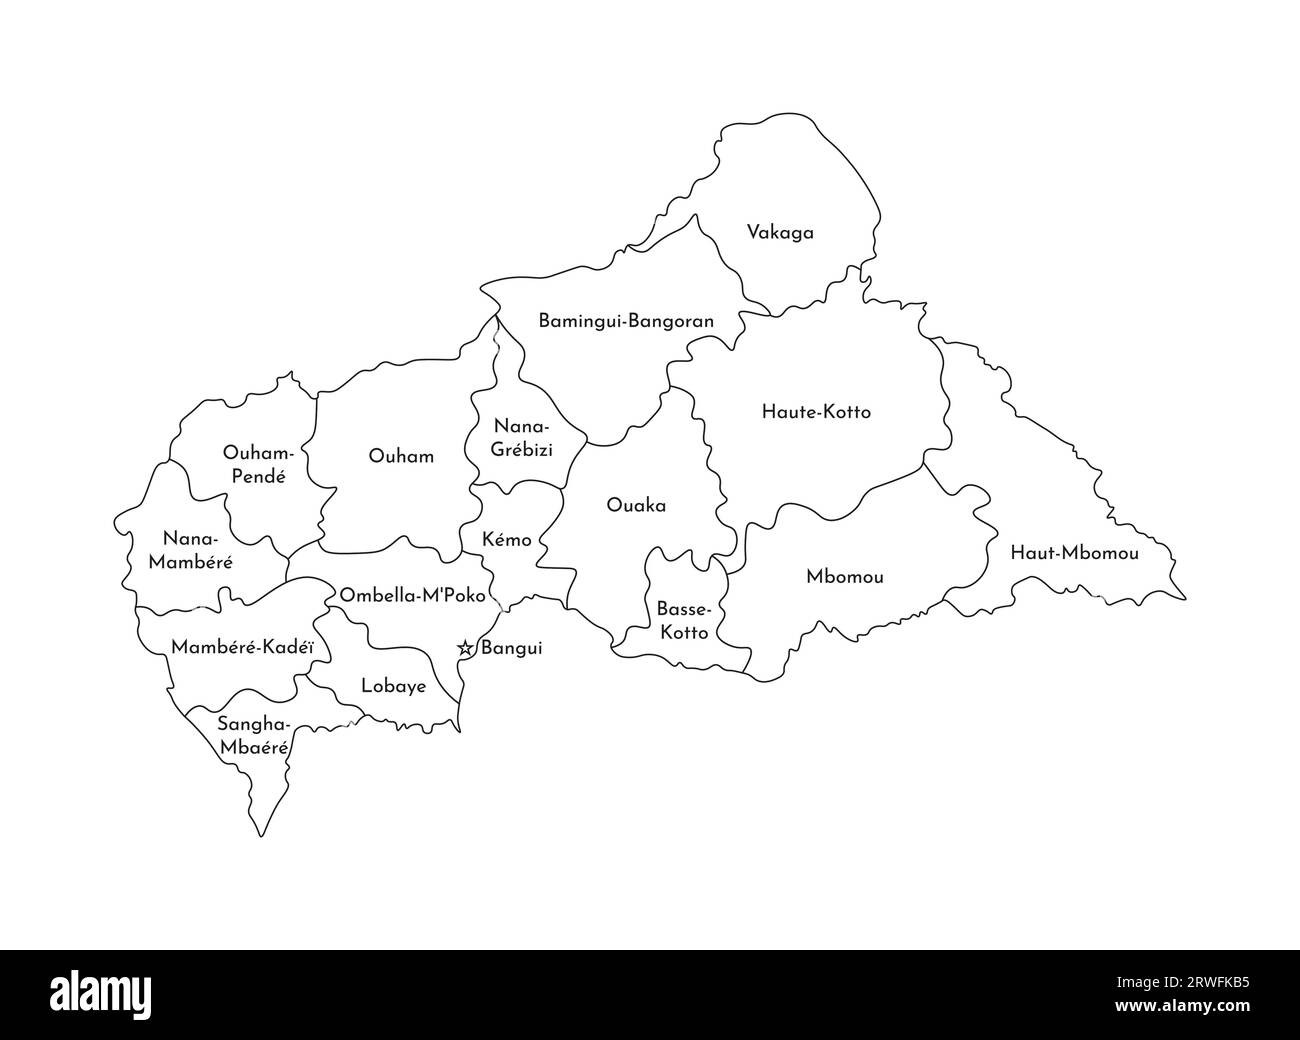 Vector isolated illustration of simplified administrative map of Central African Republic (CAR). Borders and names of the regions. Black line silhouet Stock Vector